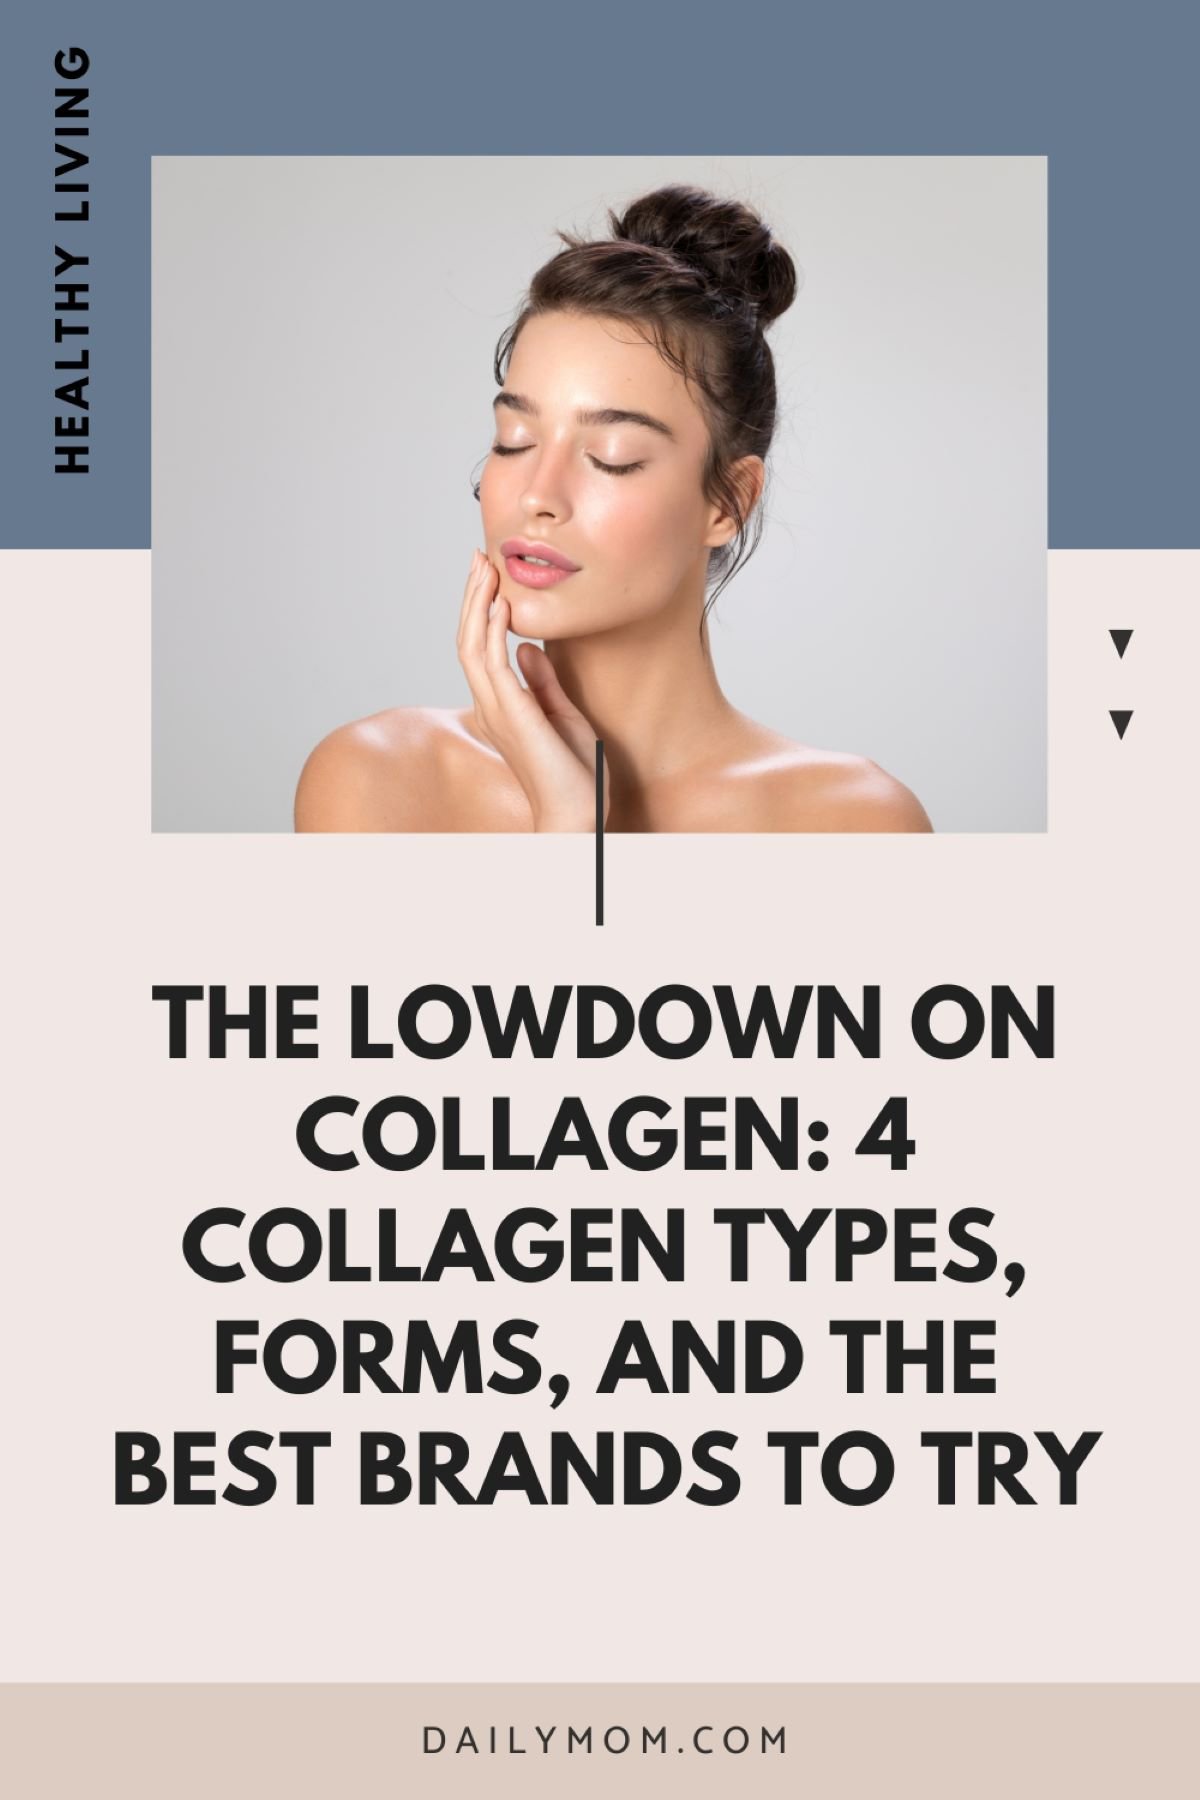 The Lowdown On Collagen: 4 Collagen Types, Forms, And The Best Brands To Try